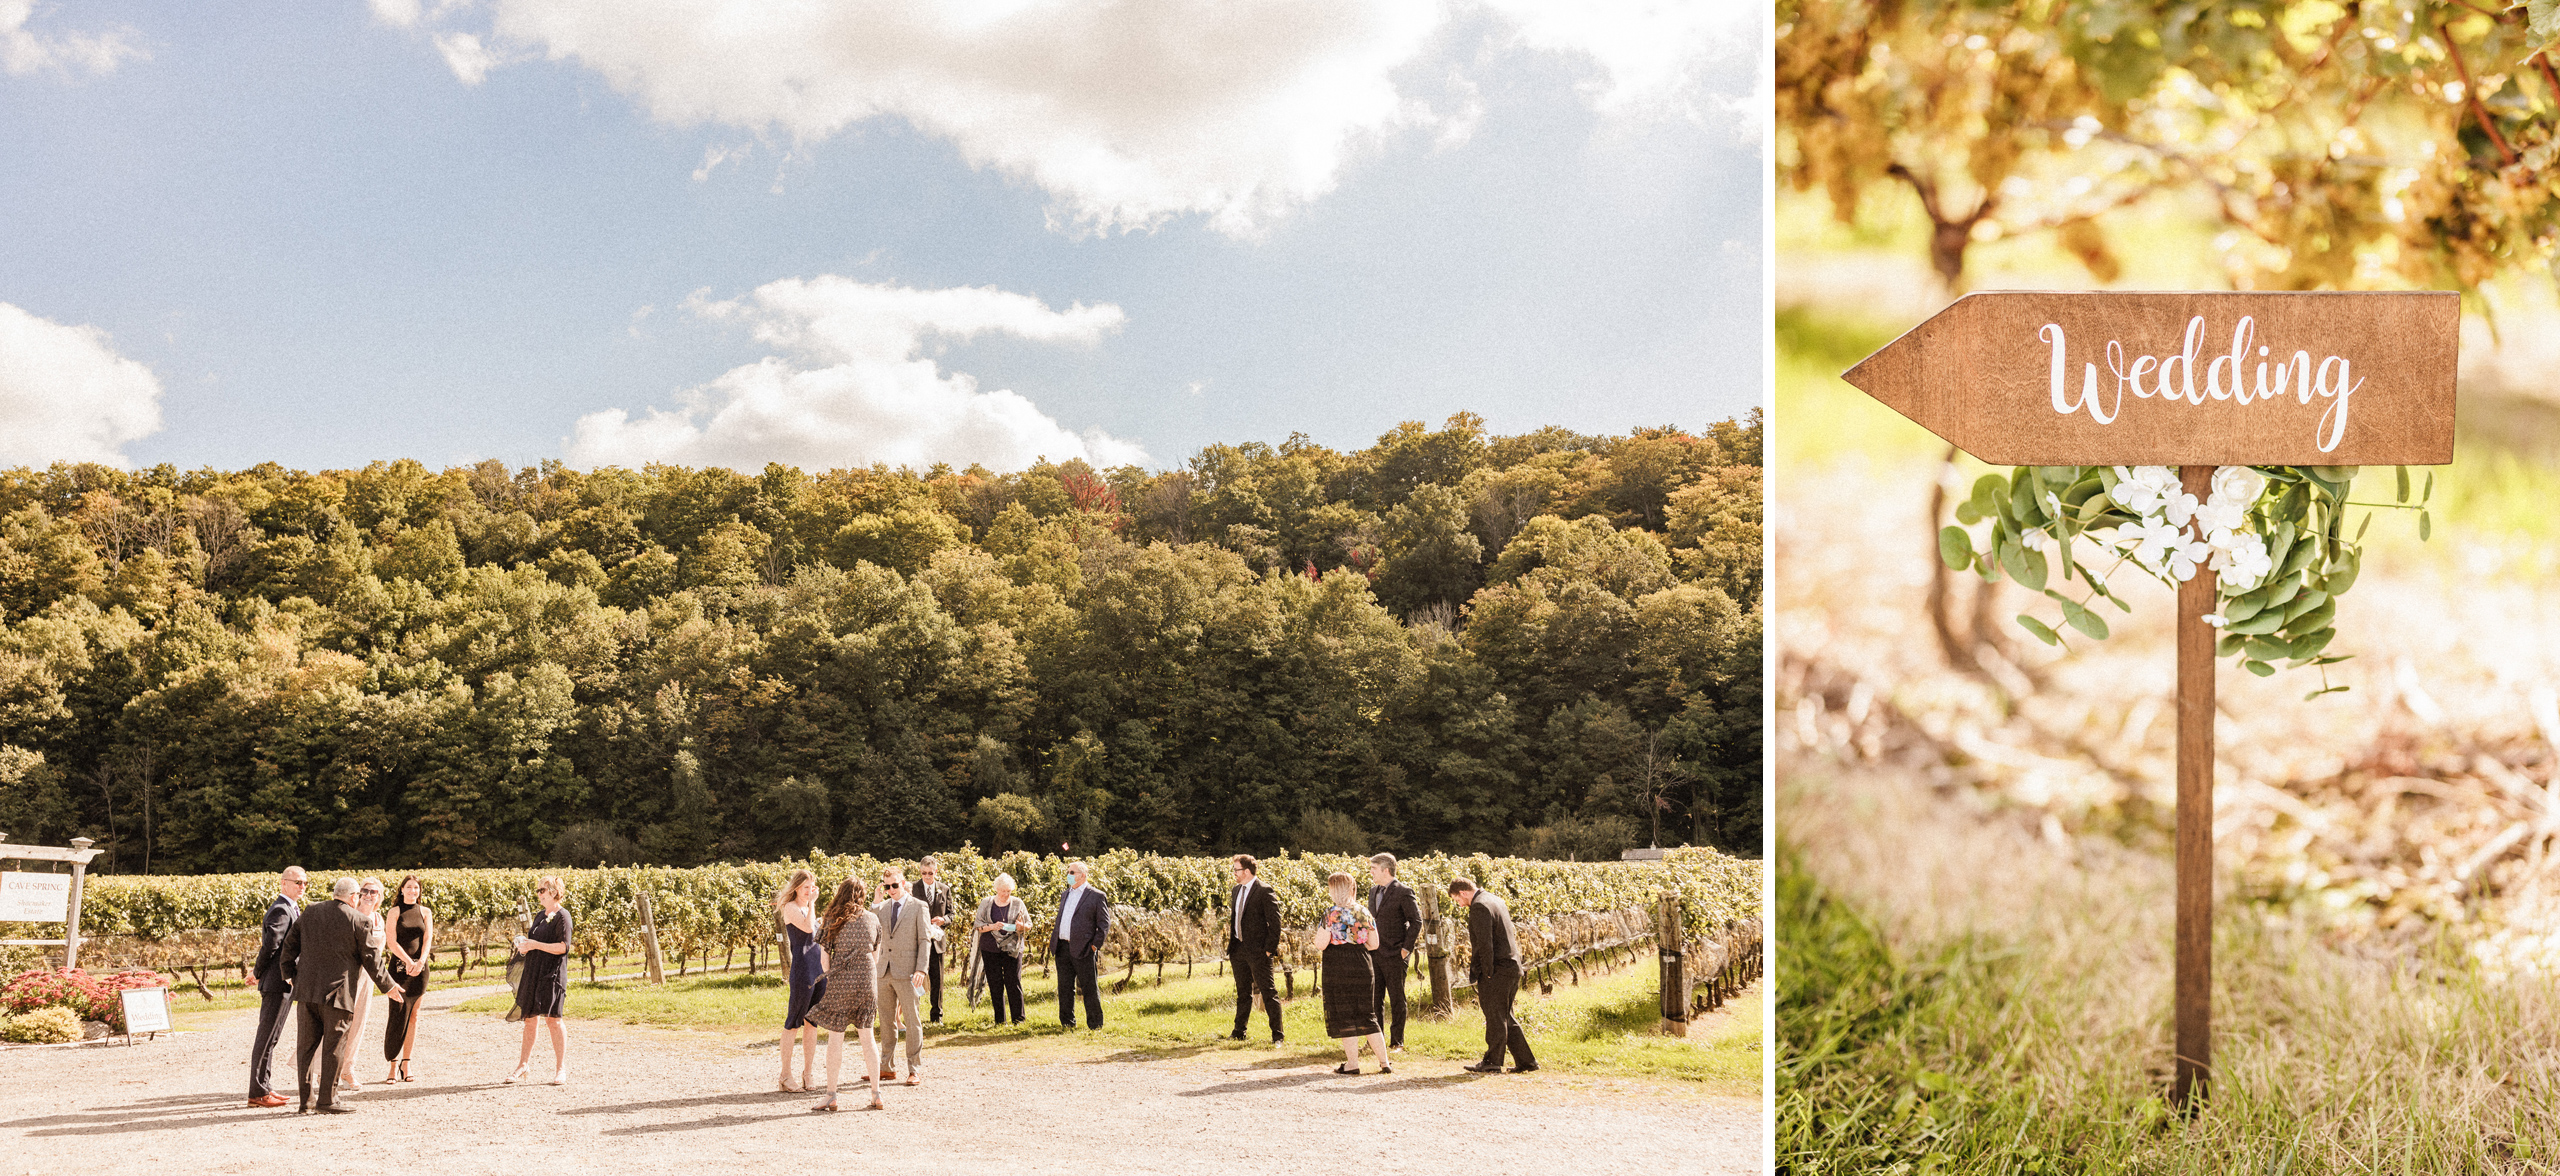 cave spring vineyard escarpment site wedding ceremony afterglow images autumn fall